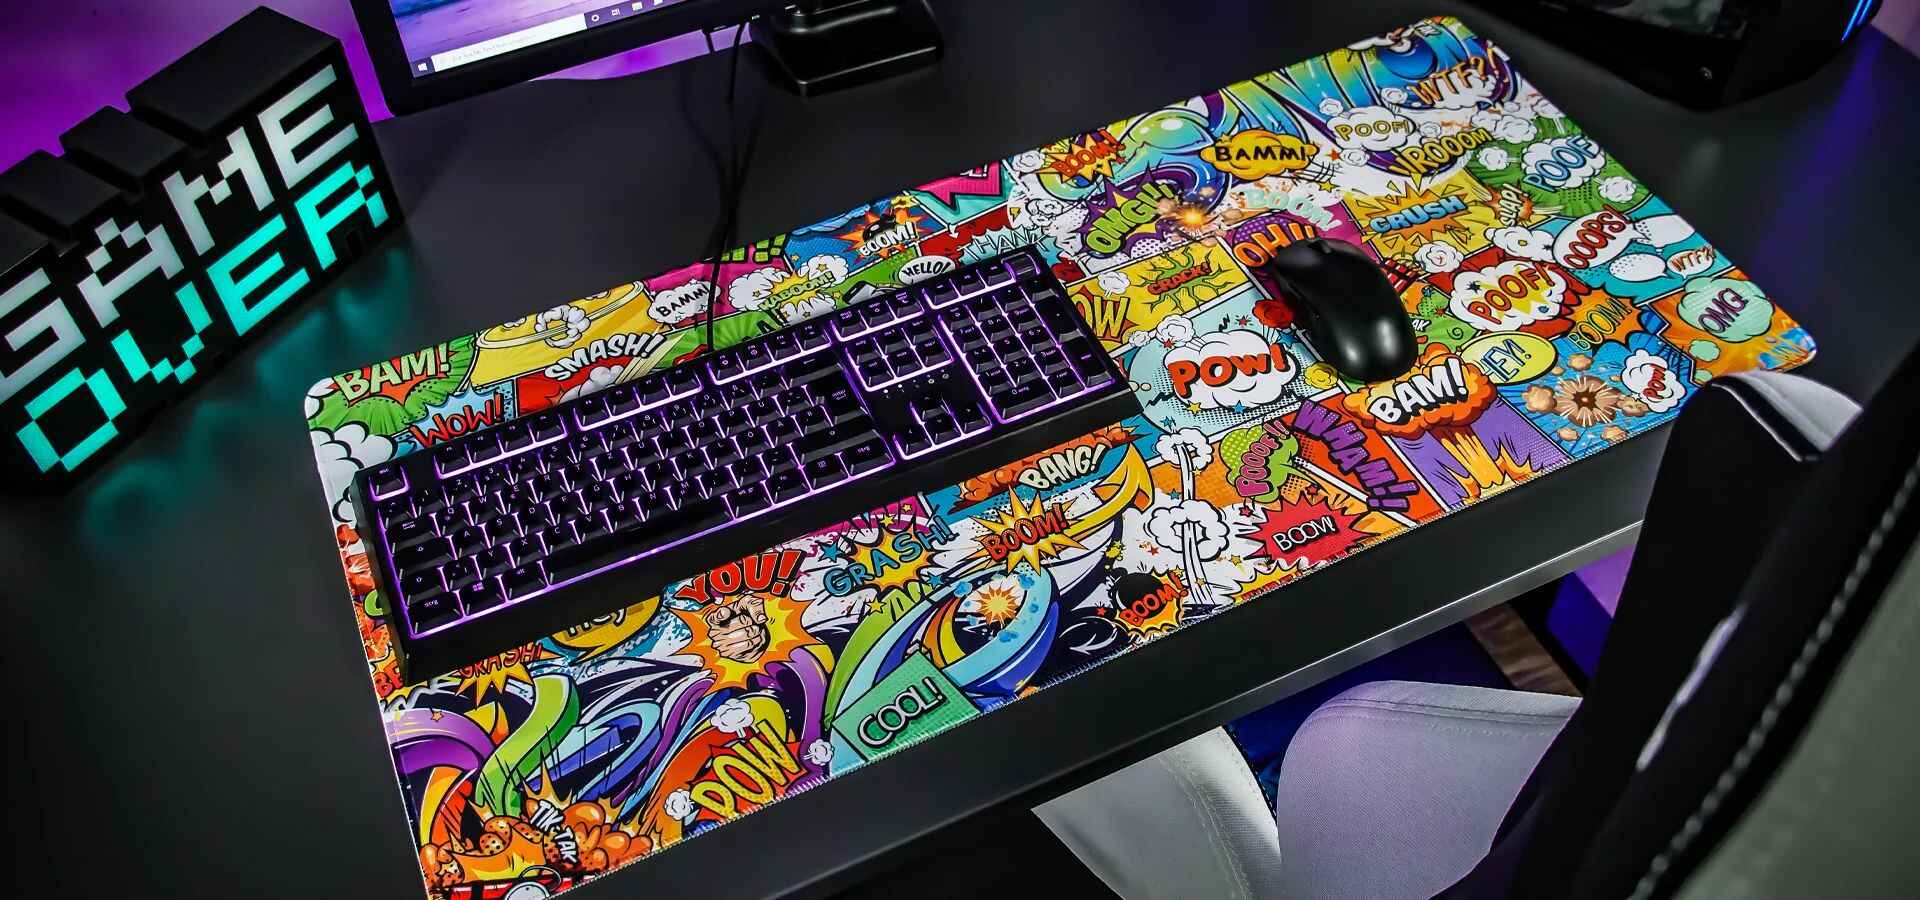 How To Make A Custom Gaming Mouse Pad